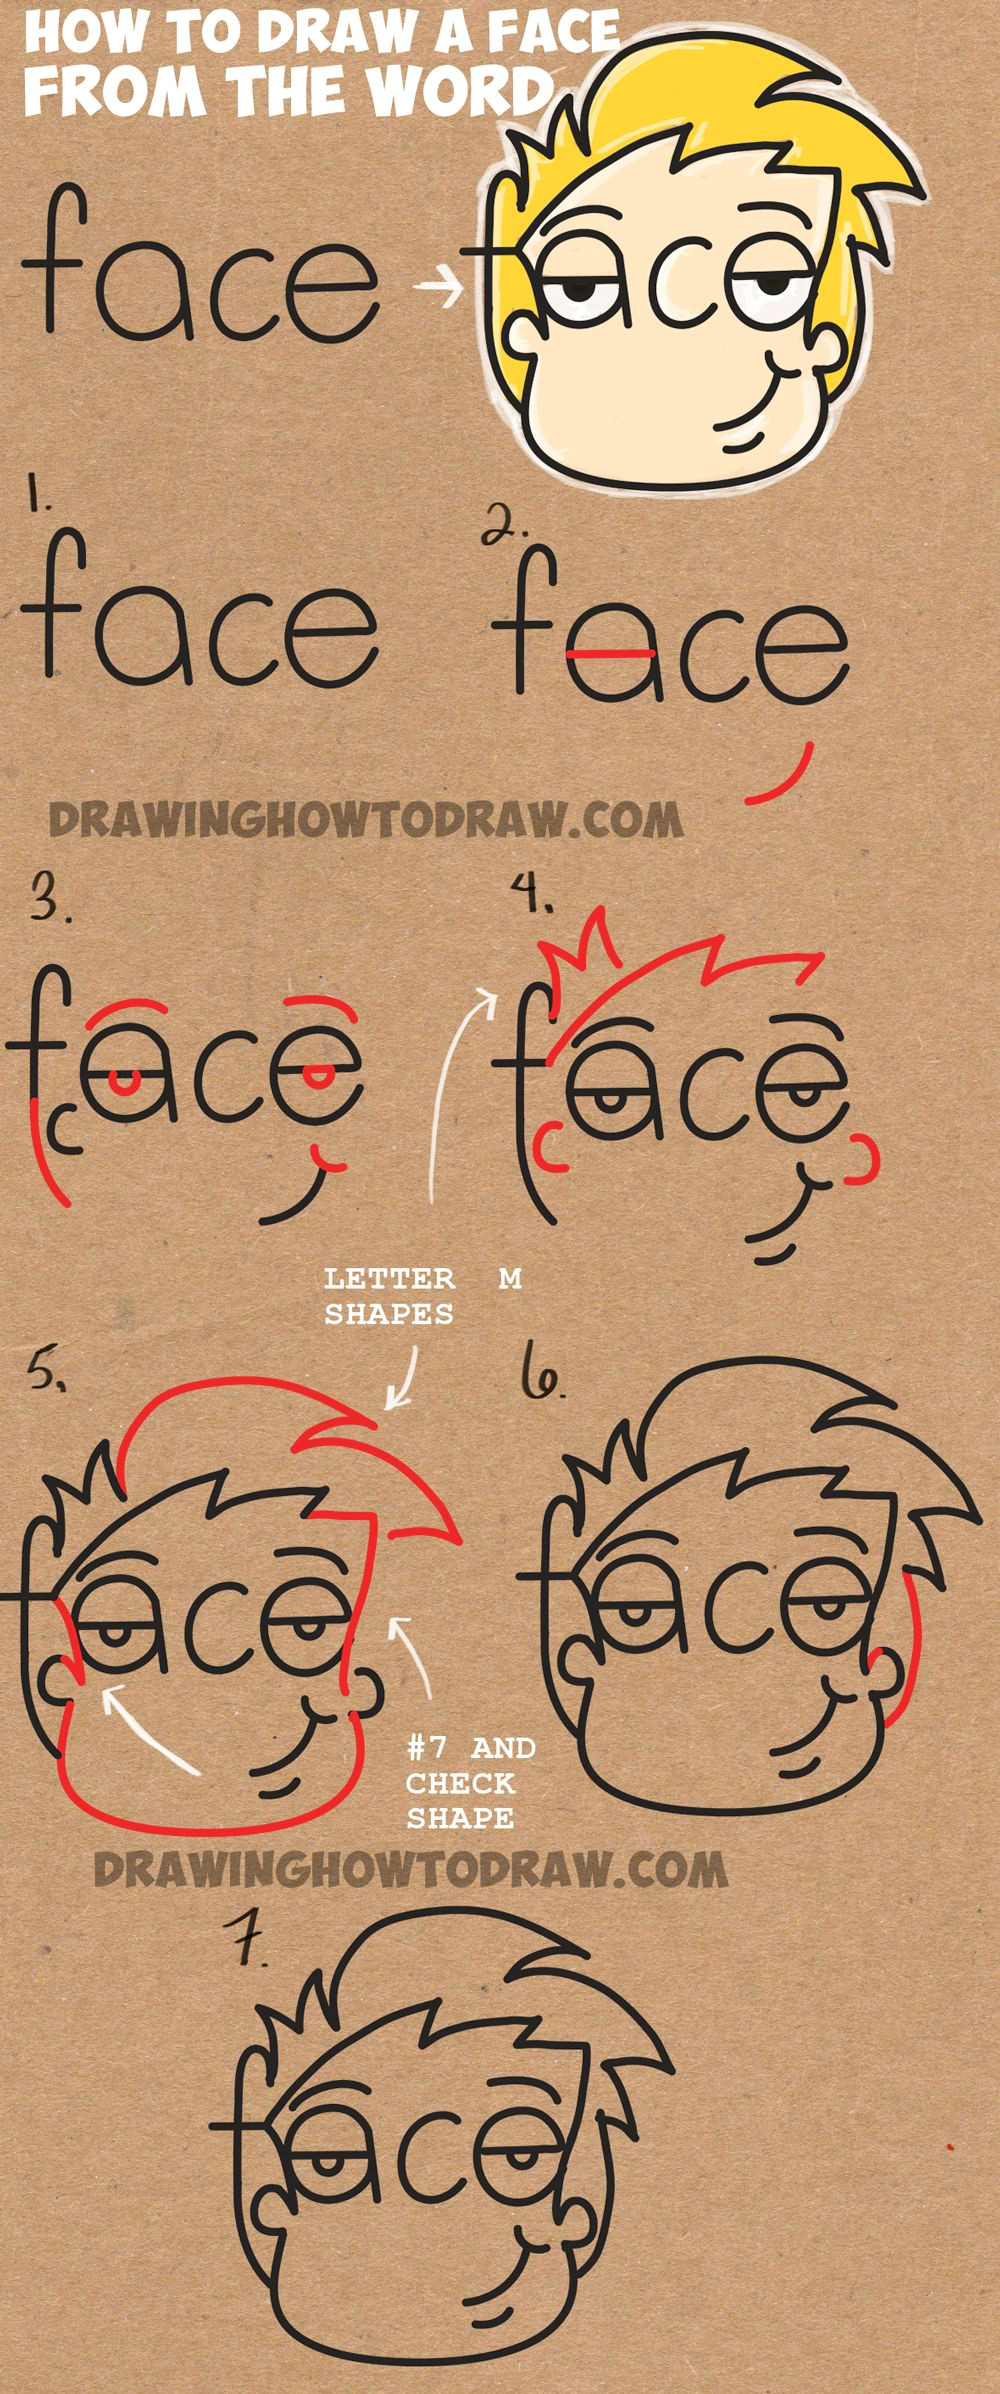 Easy Drawing Using Alphabets How to Draw Cartoon Faces From the Word Face Easy Step by Step